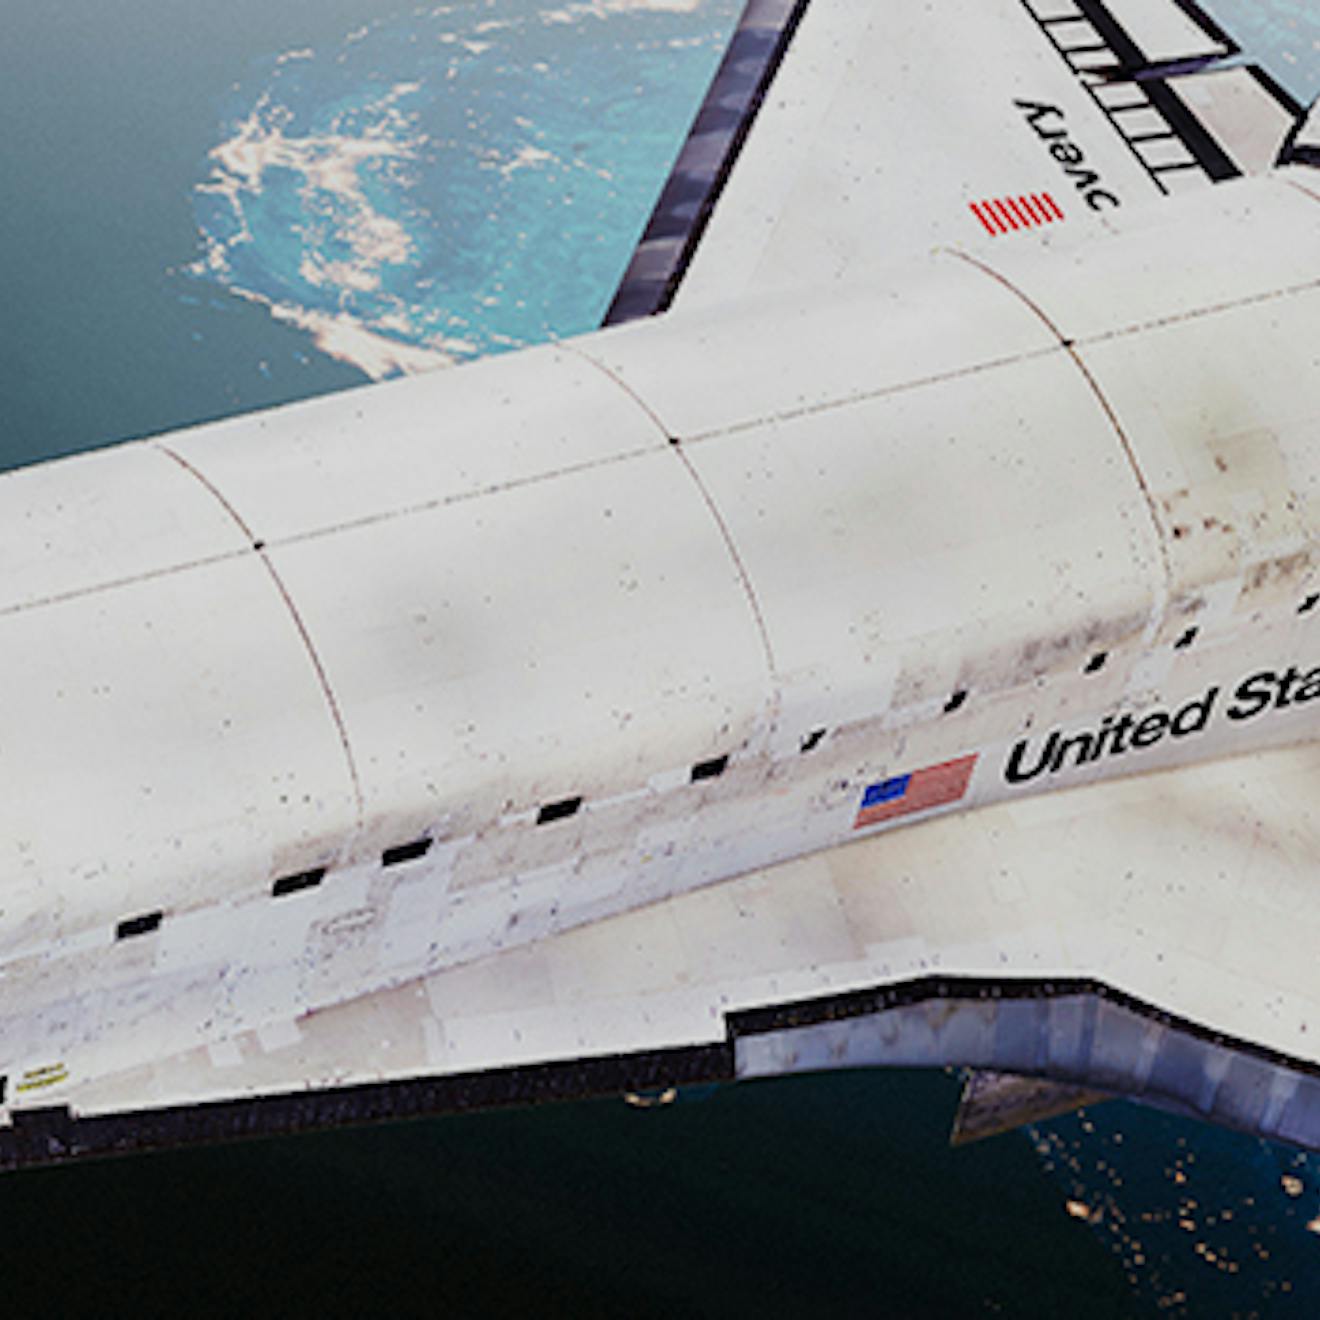 3D Model of the Space Shuttle Discovery visualized in Cesium